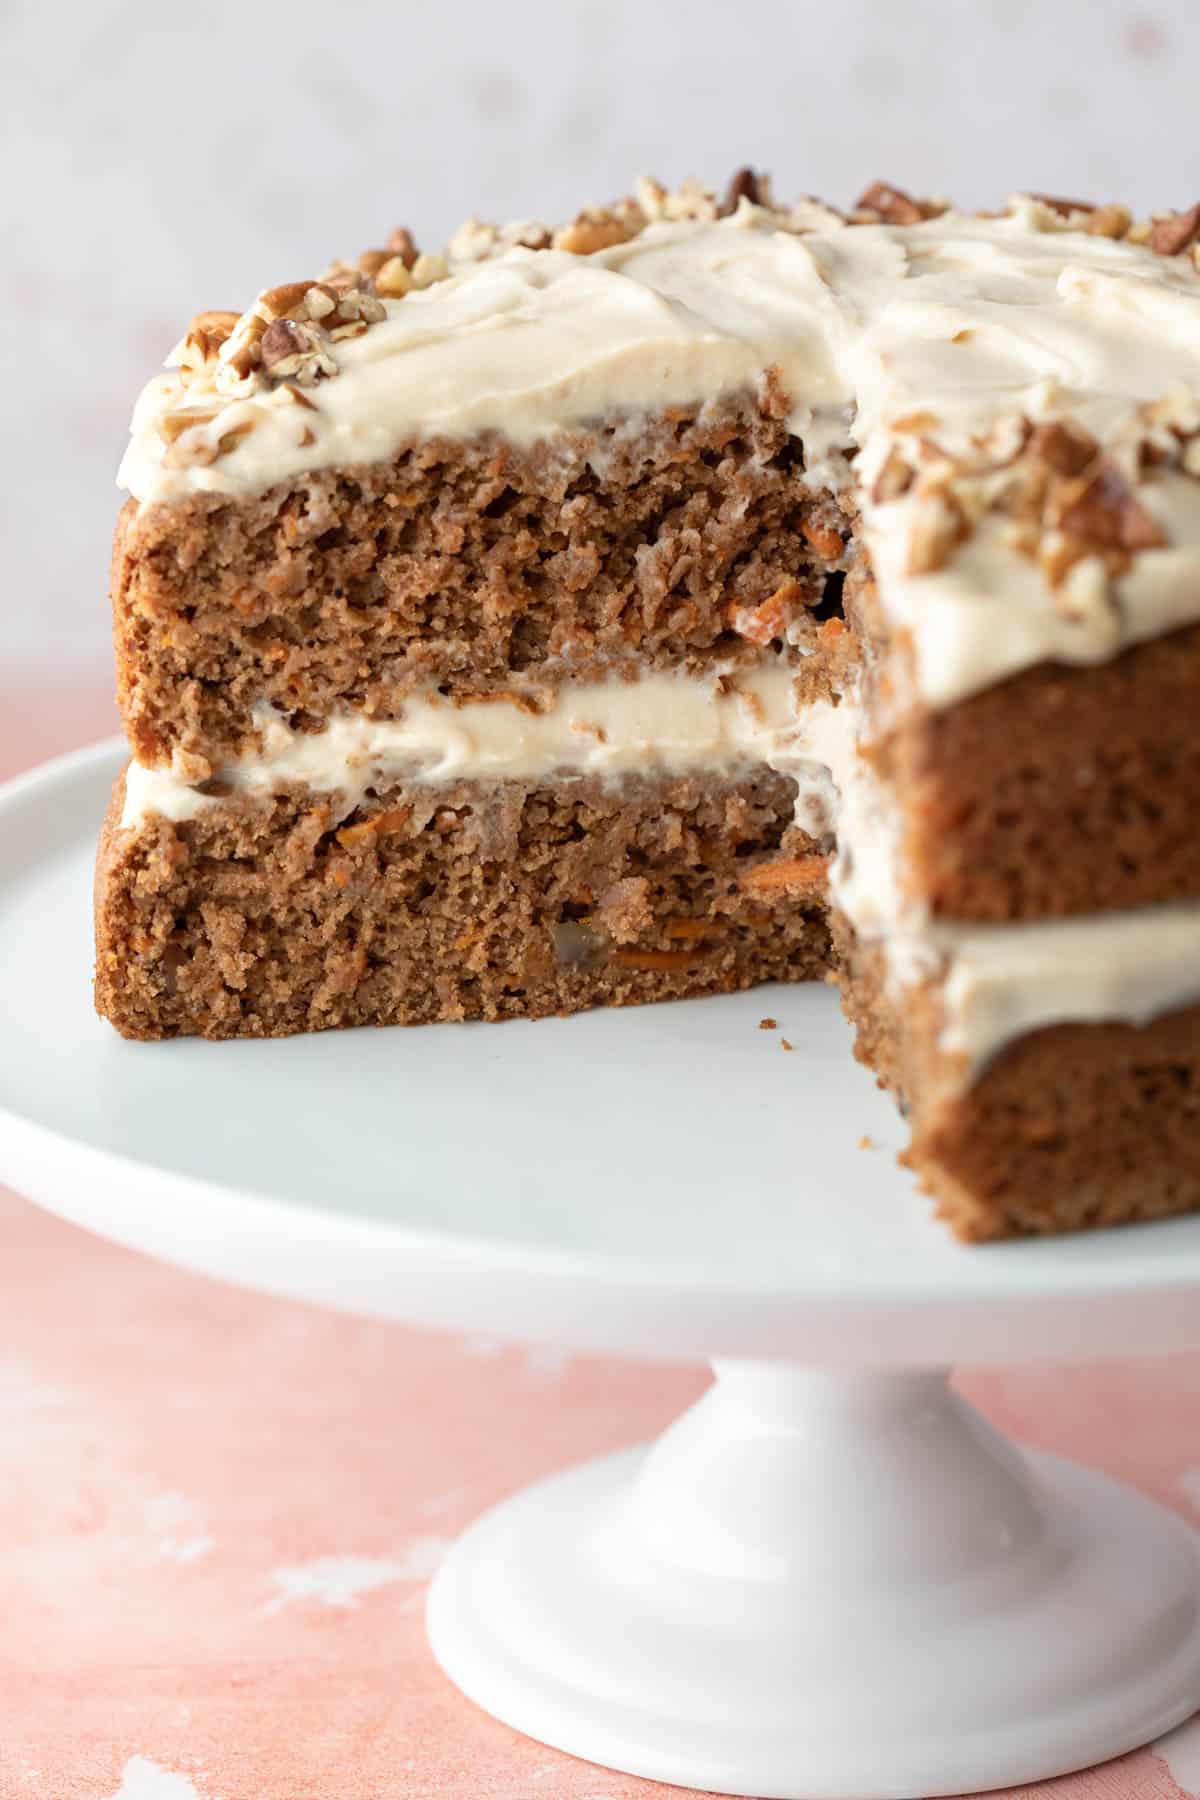 Carrot cake on a white stand with a quarter of the cake removed showing the frosting between the moist and fluffy layers.